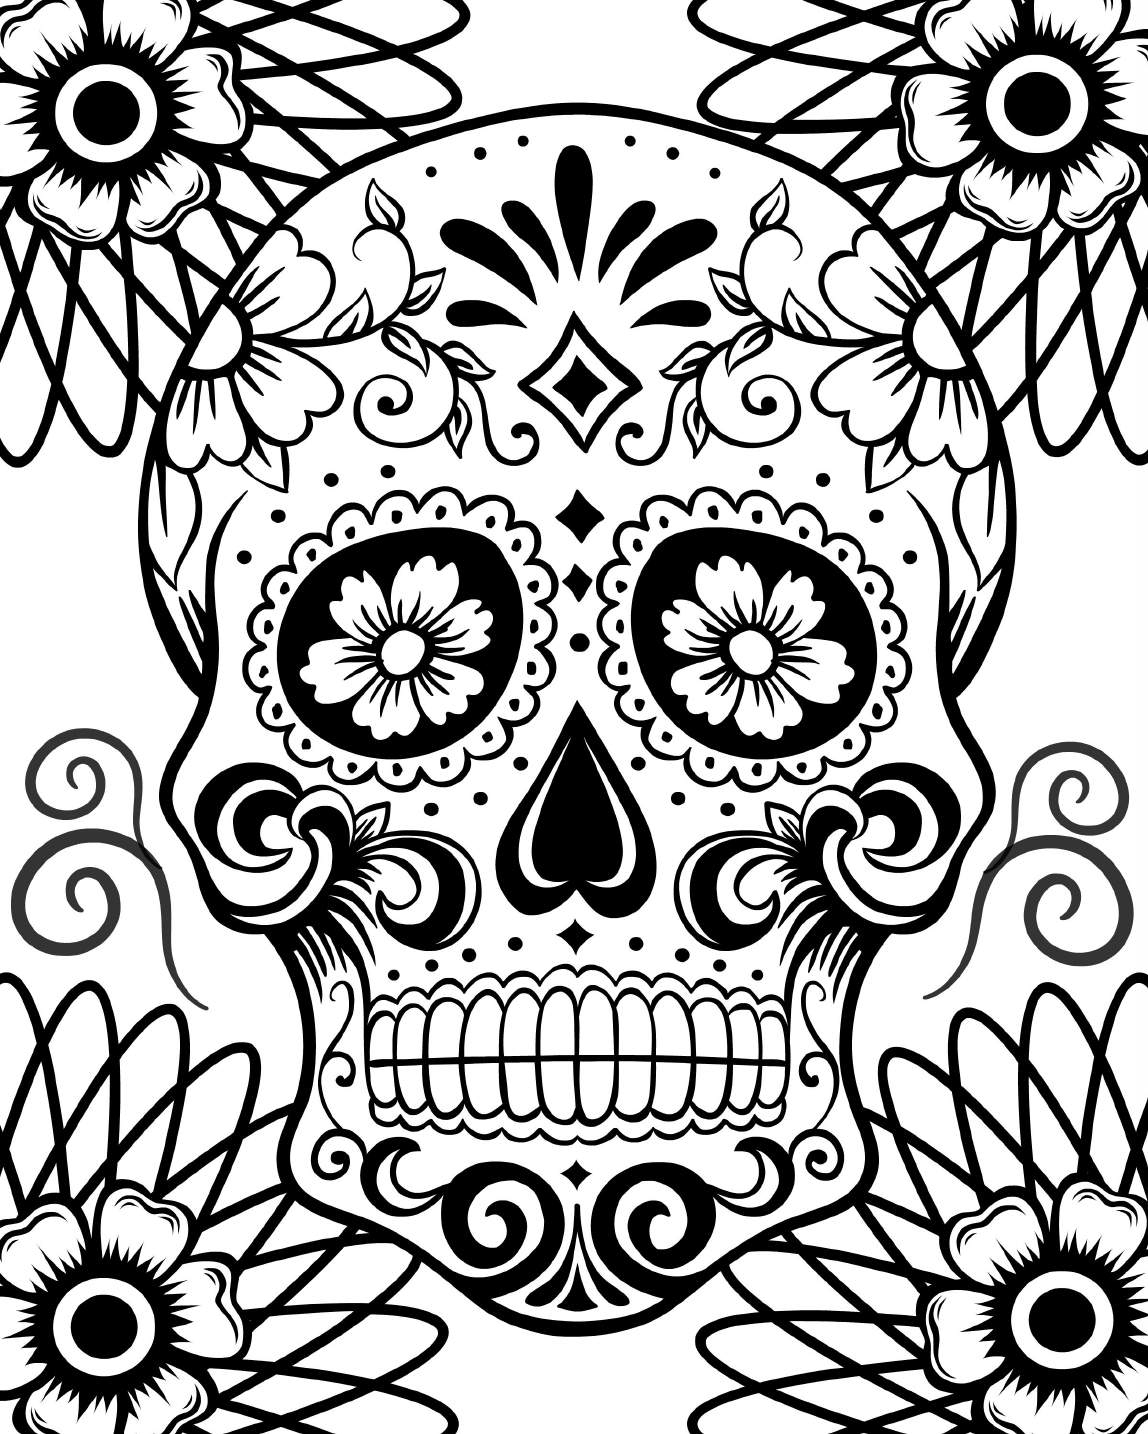 Free Printable Day of the Dead Coloring Pages - Best Coloring Pages For ...